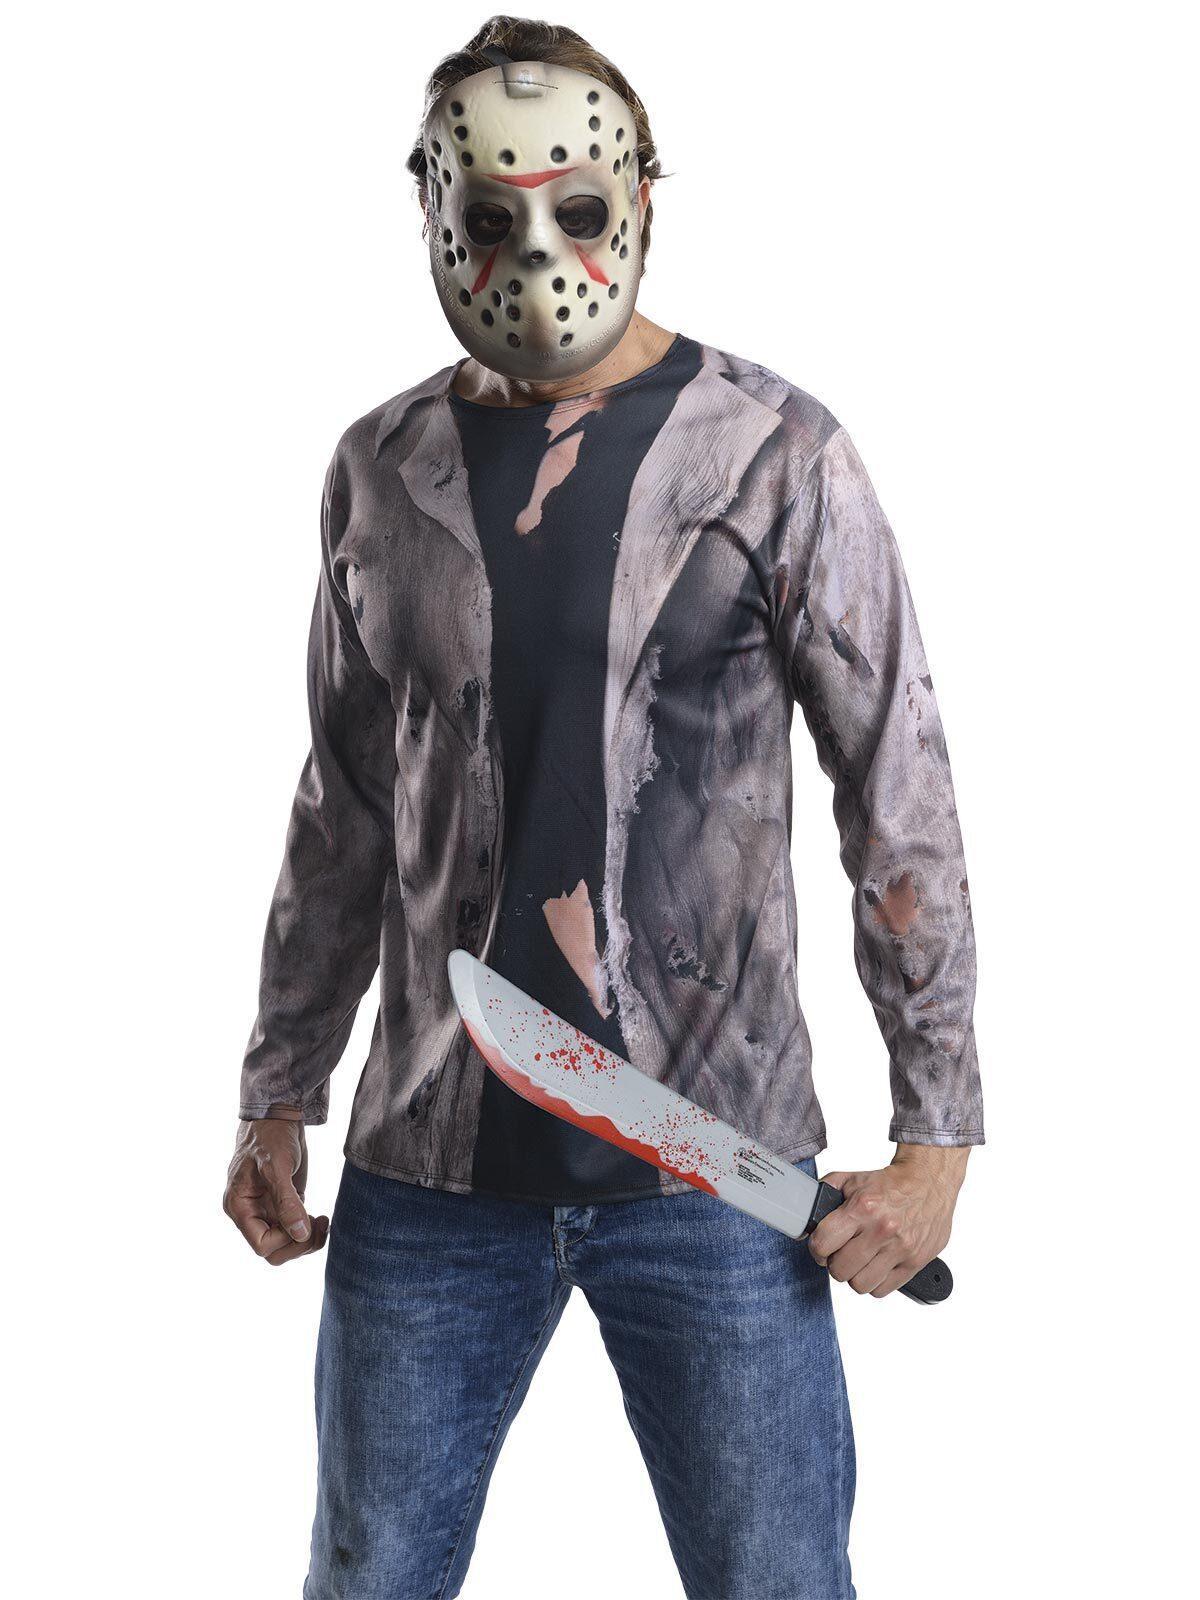 Marvel Jason Vorhees Friday The 13th Deluxe Mens Fancy Dress Up Costume